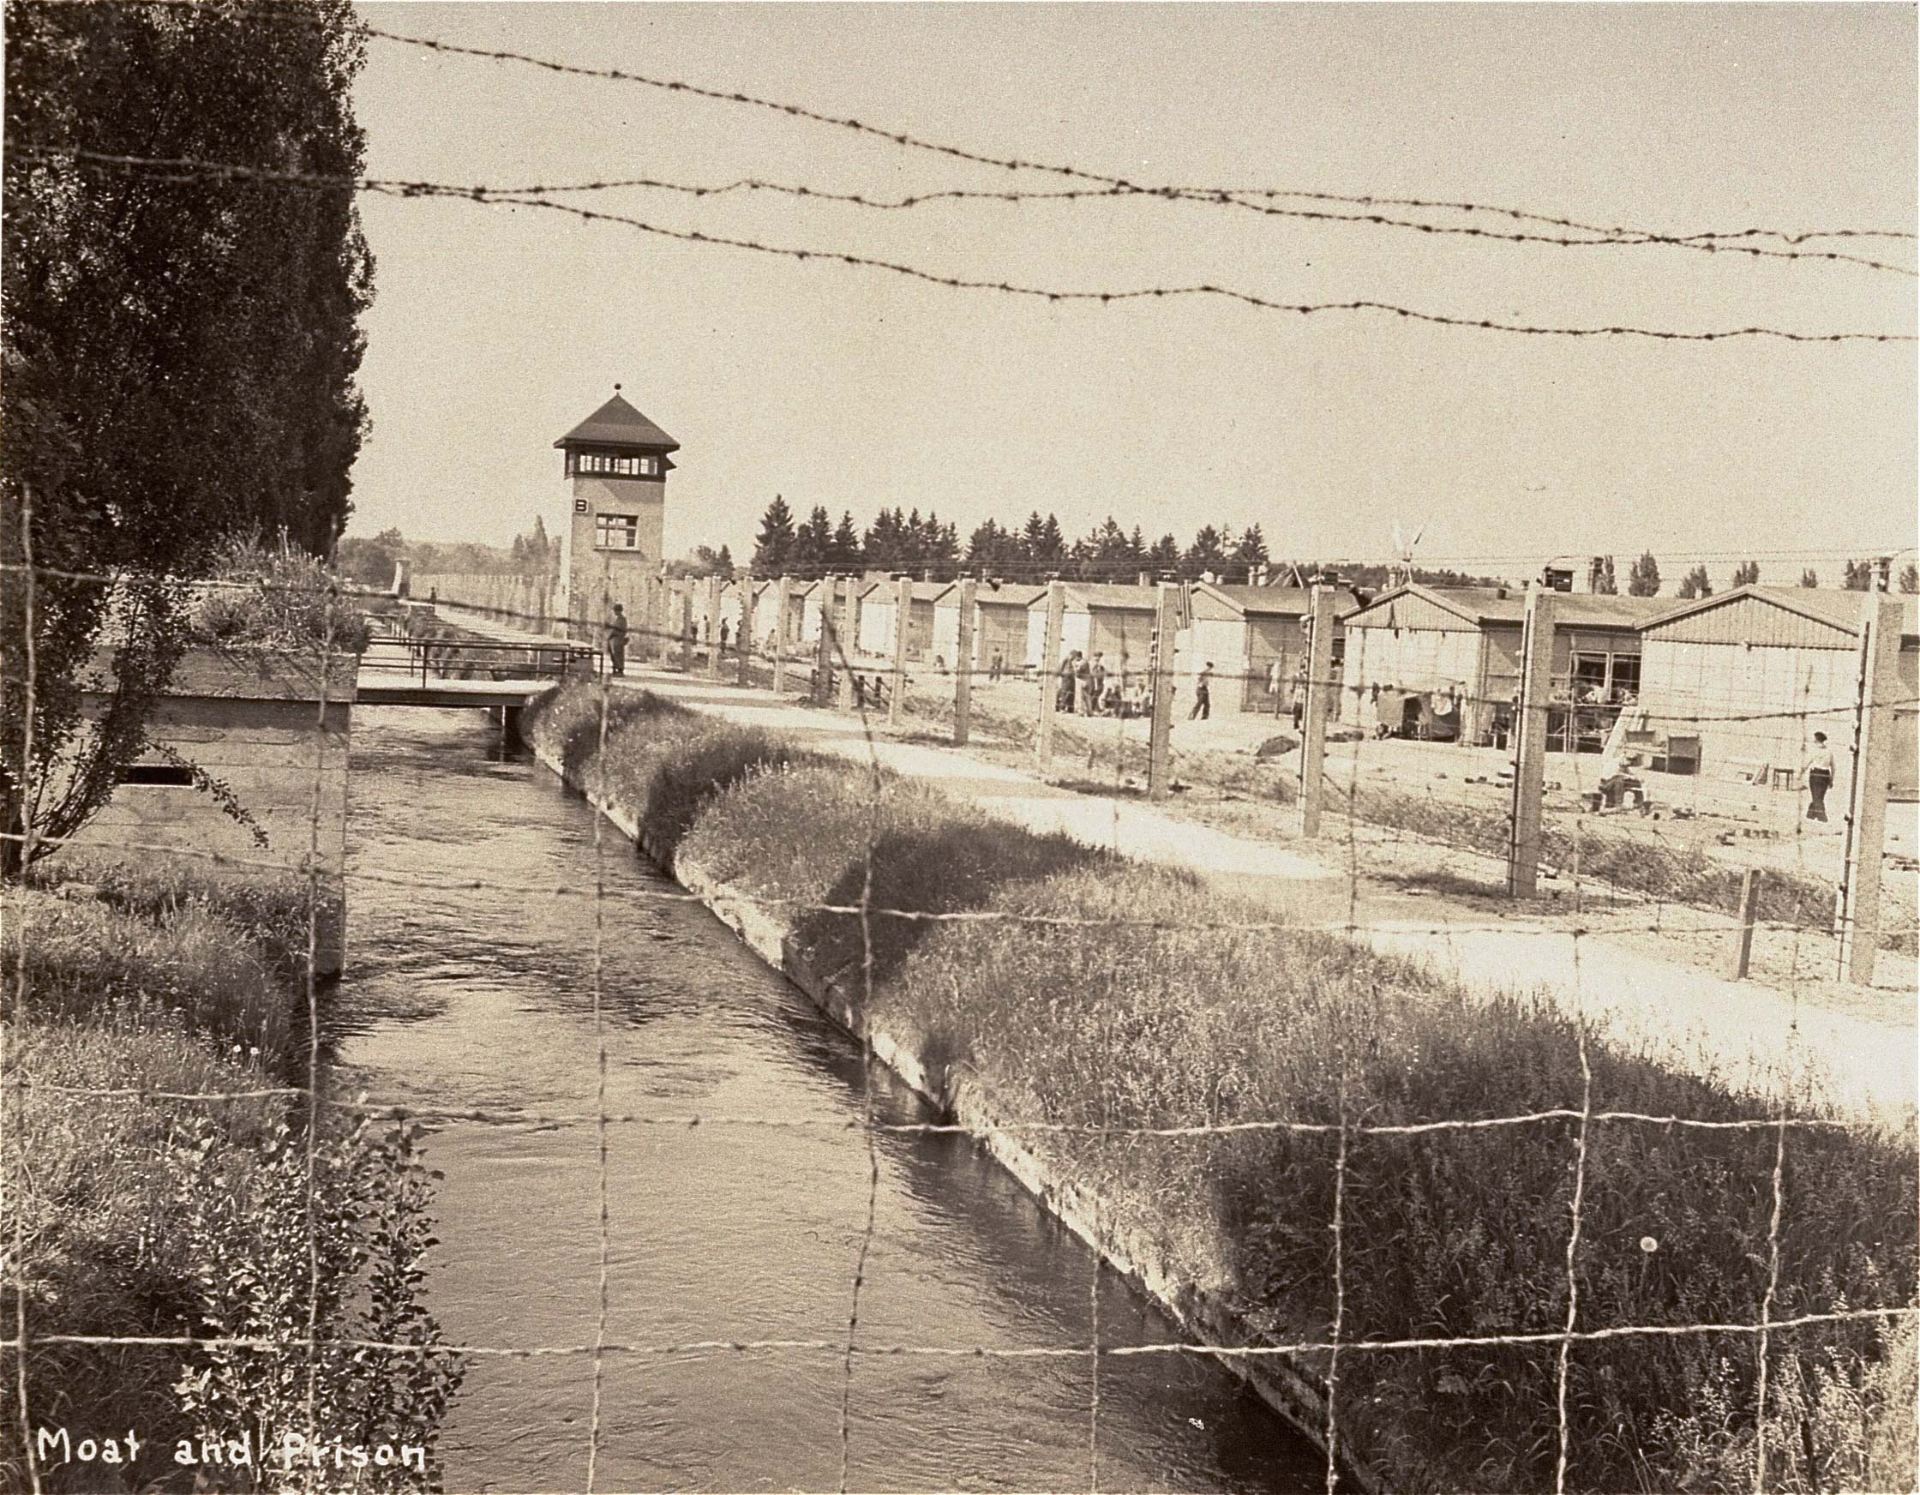 A section of the Dachau concentration camp, including the guard tower, is seen through the barbed wire fence shortly after the camp was liberated by American soldiers on April 29, 1945. (United States Holocaust Memorial Museum, courtesy of Francis Robert Arzt)